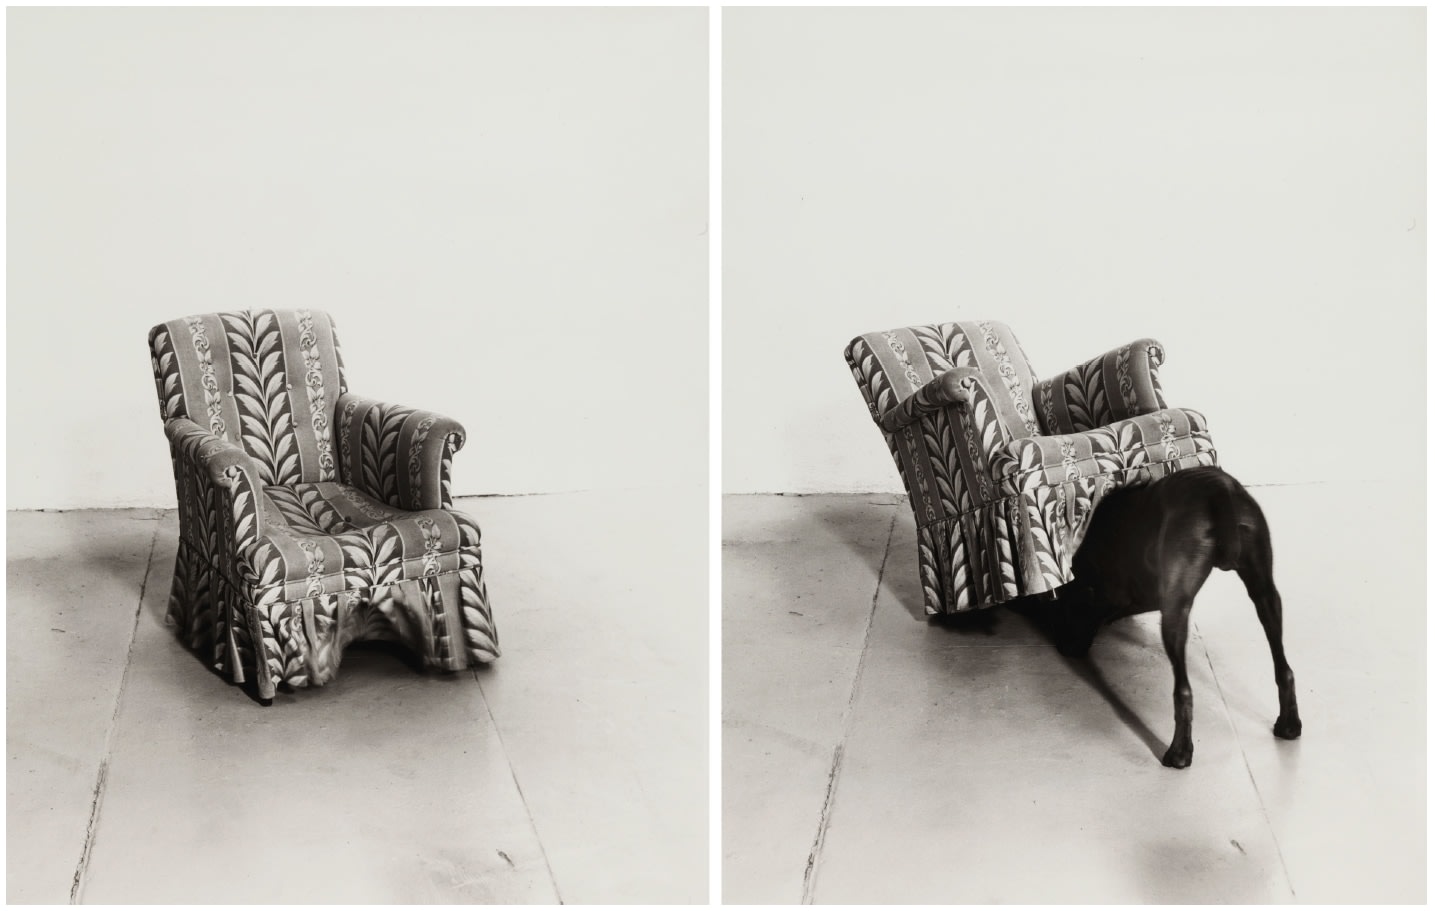 So Reclined, 1971-72